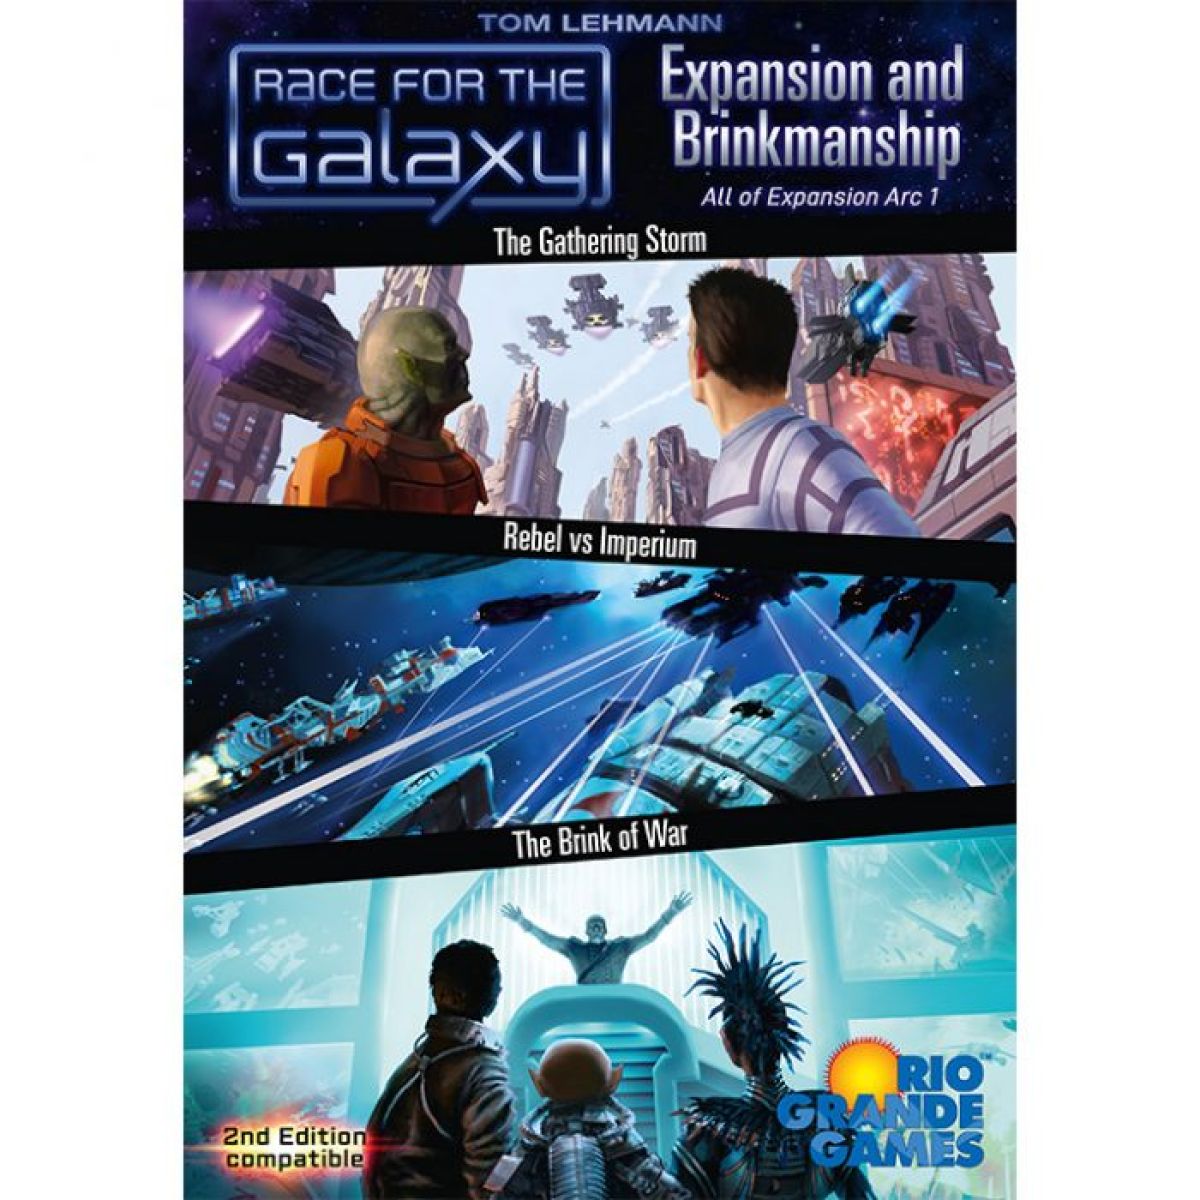 Race for the Galaxy - Expansion and Brinkmanship Arc 1